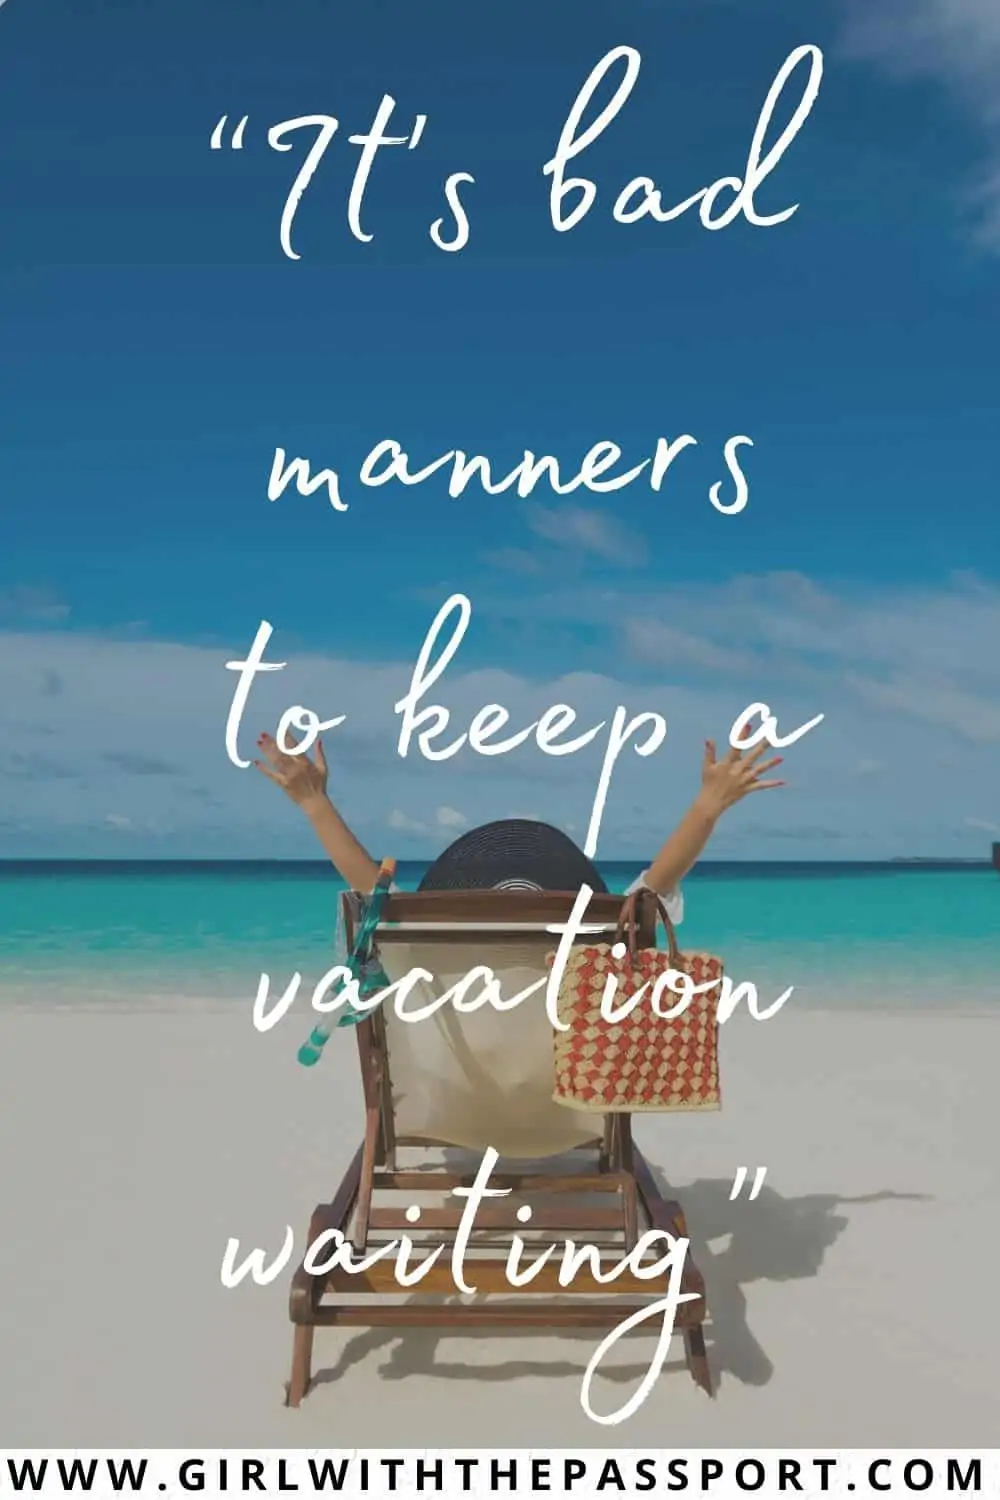 232 Amazing and Best Travel Captions for Instagram